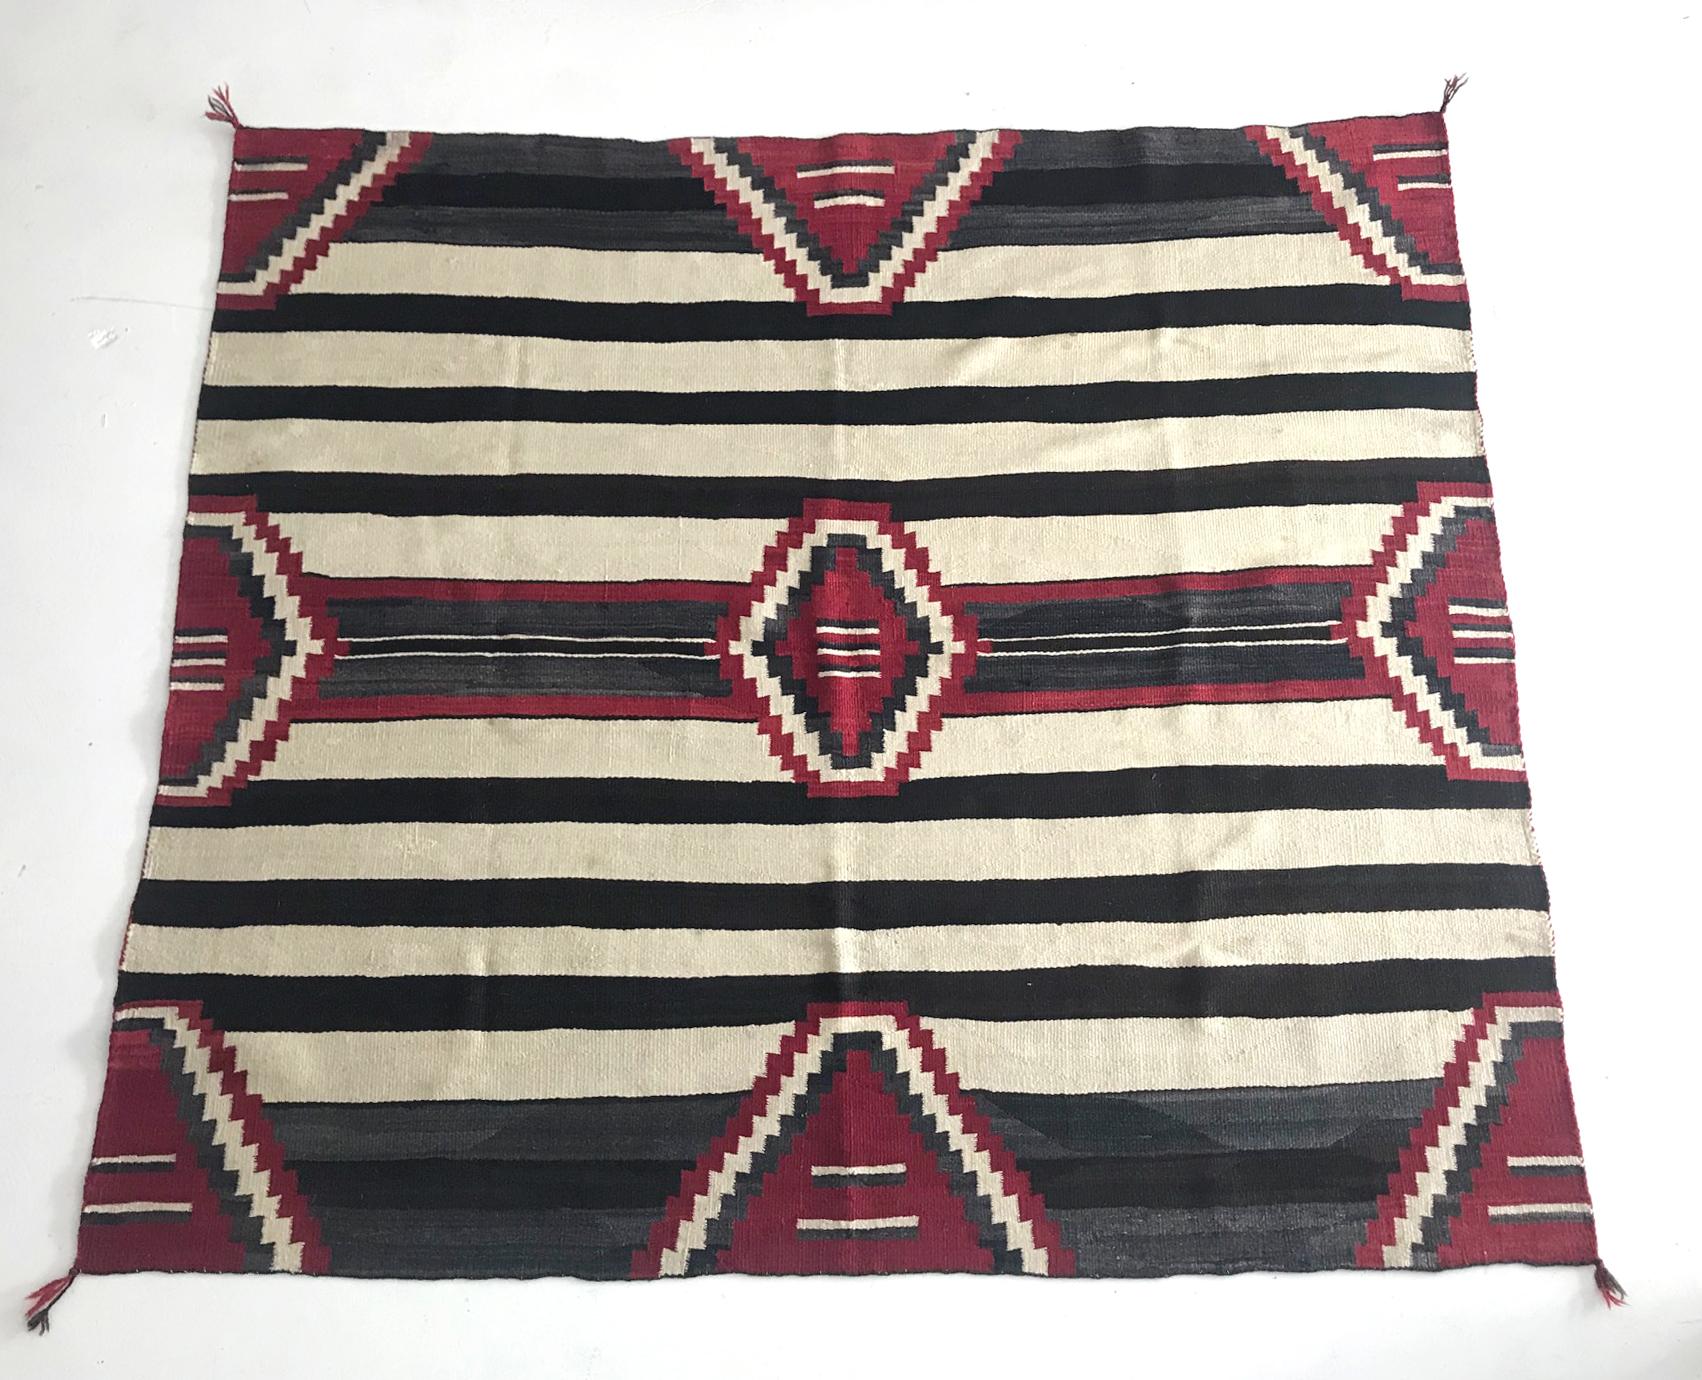 On offer is a Navajo chief blanket of the third phase circa 1860-1880. The chief blanket is the highest achievement of the Navajo textile development and this is a wonderful example of the high quality. Woven from off white, brown sheep yarns of